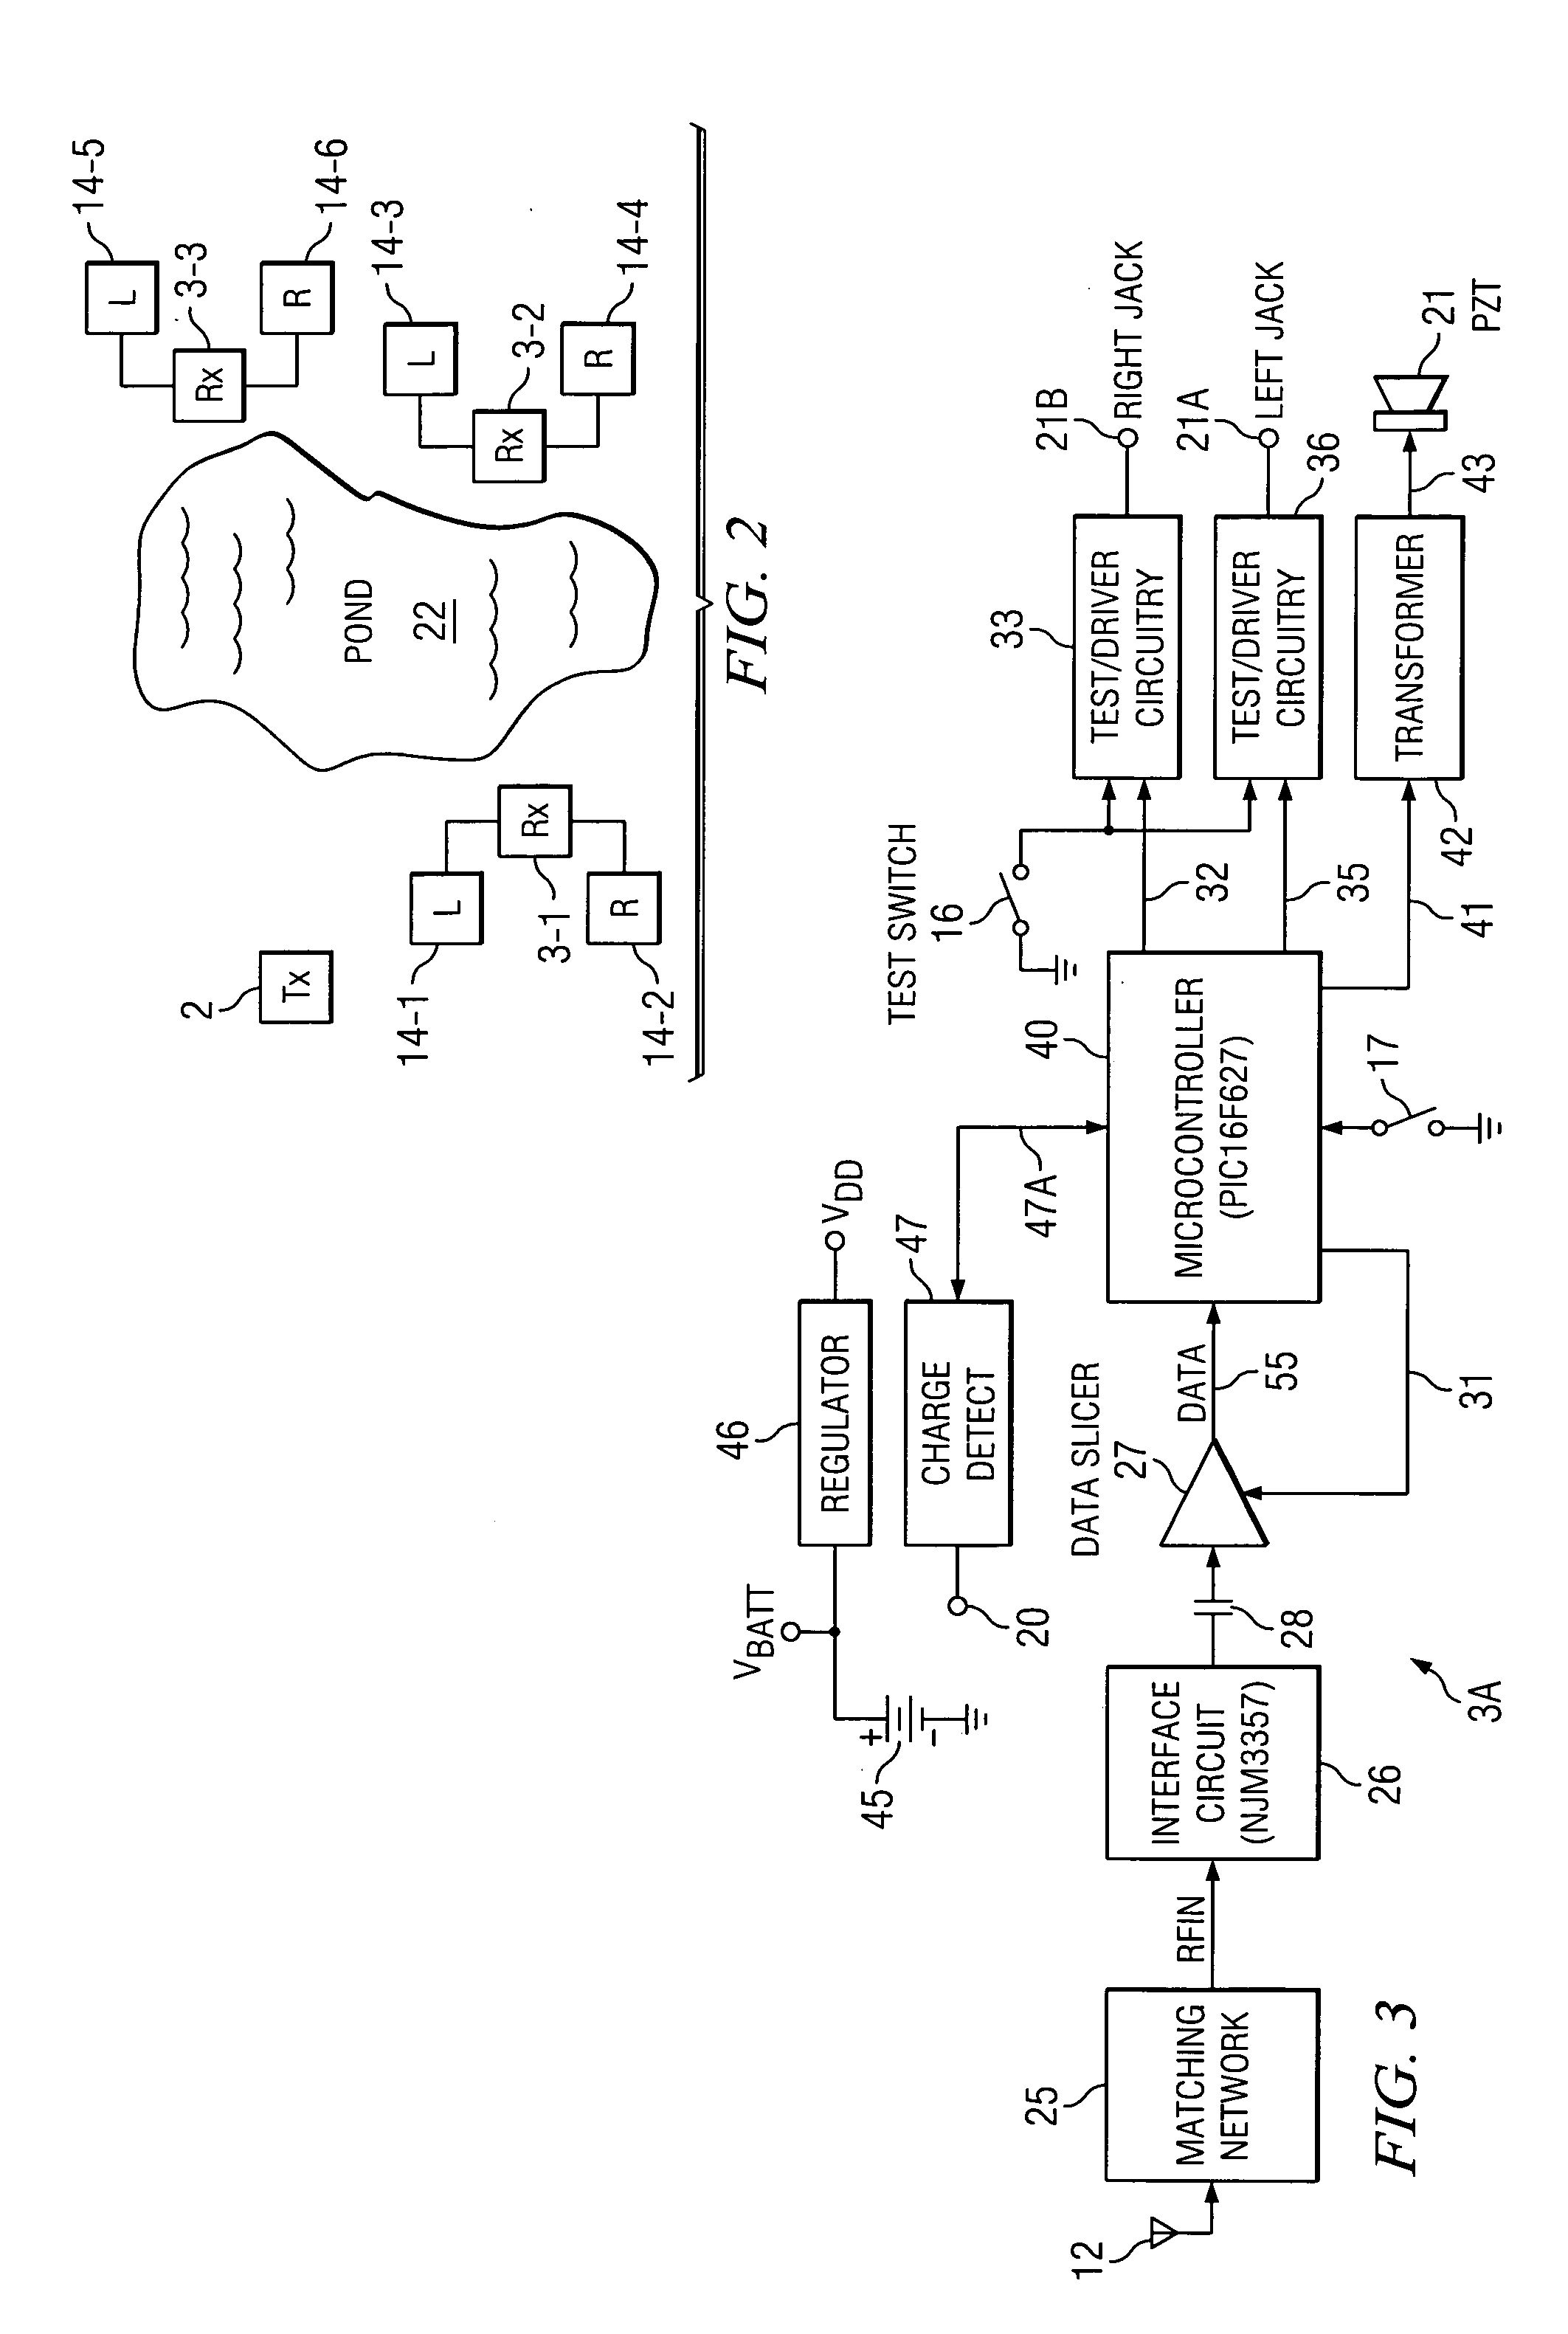 Control system and method for remote launchers